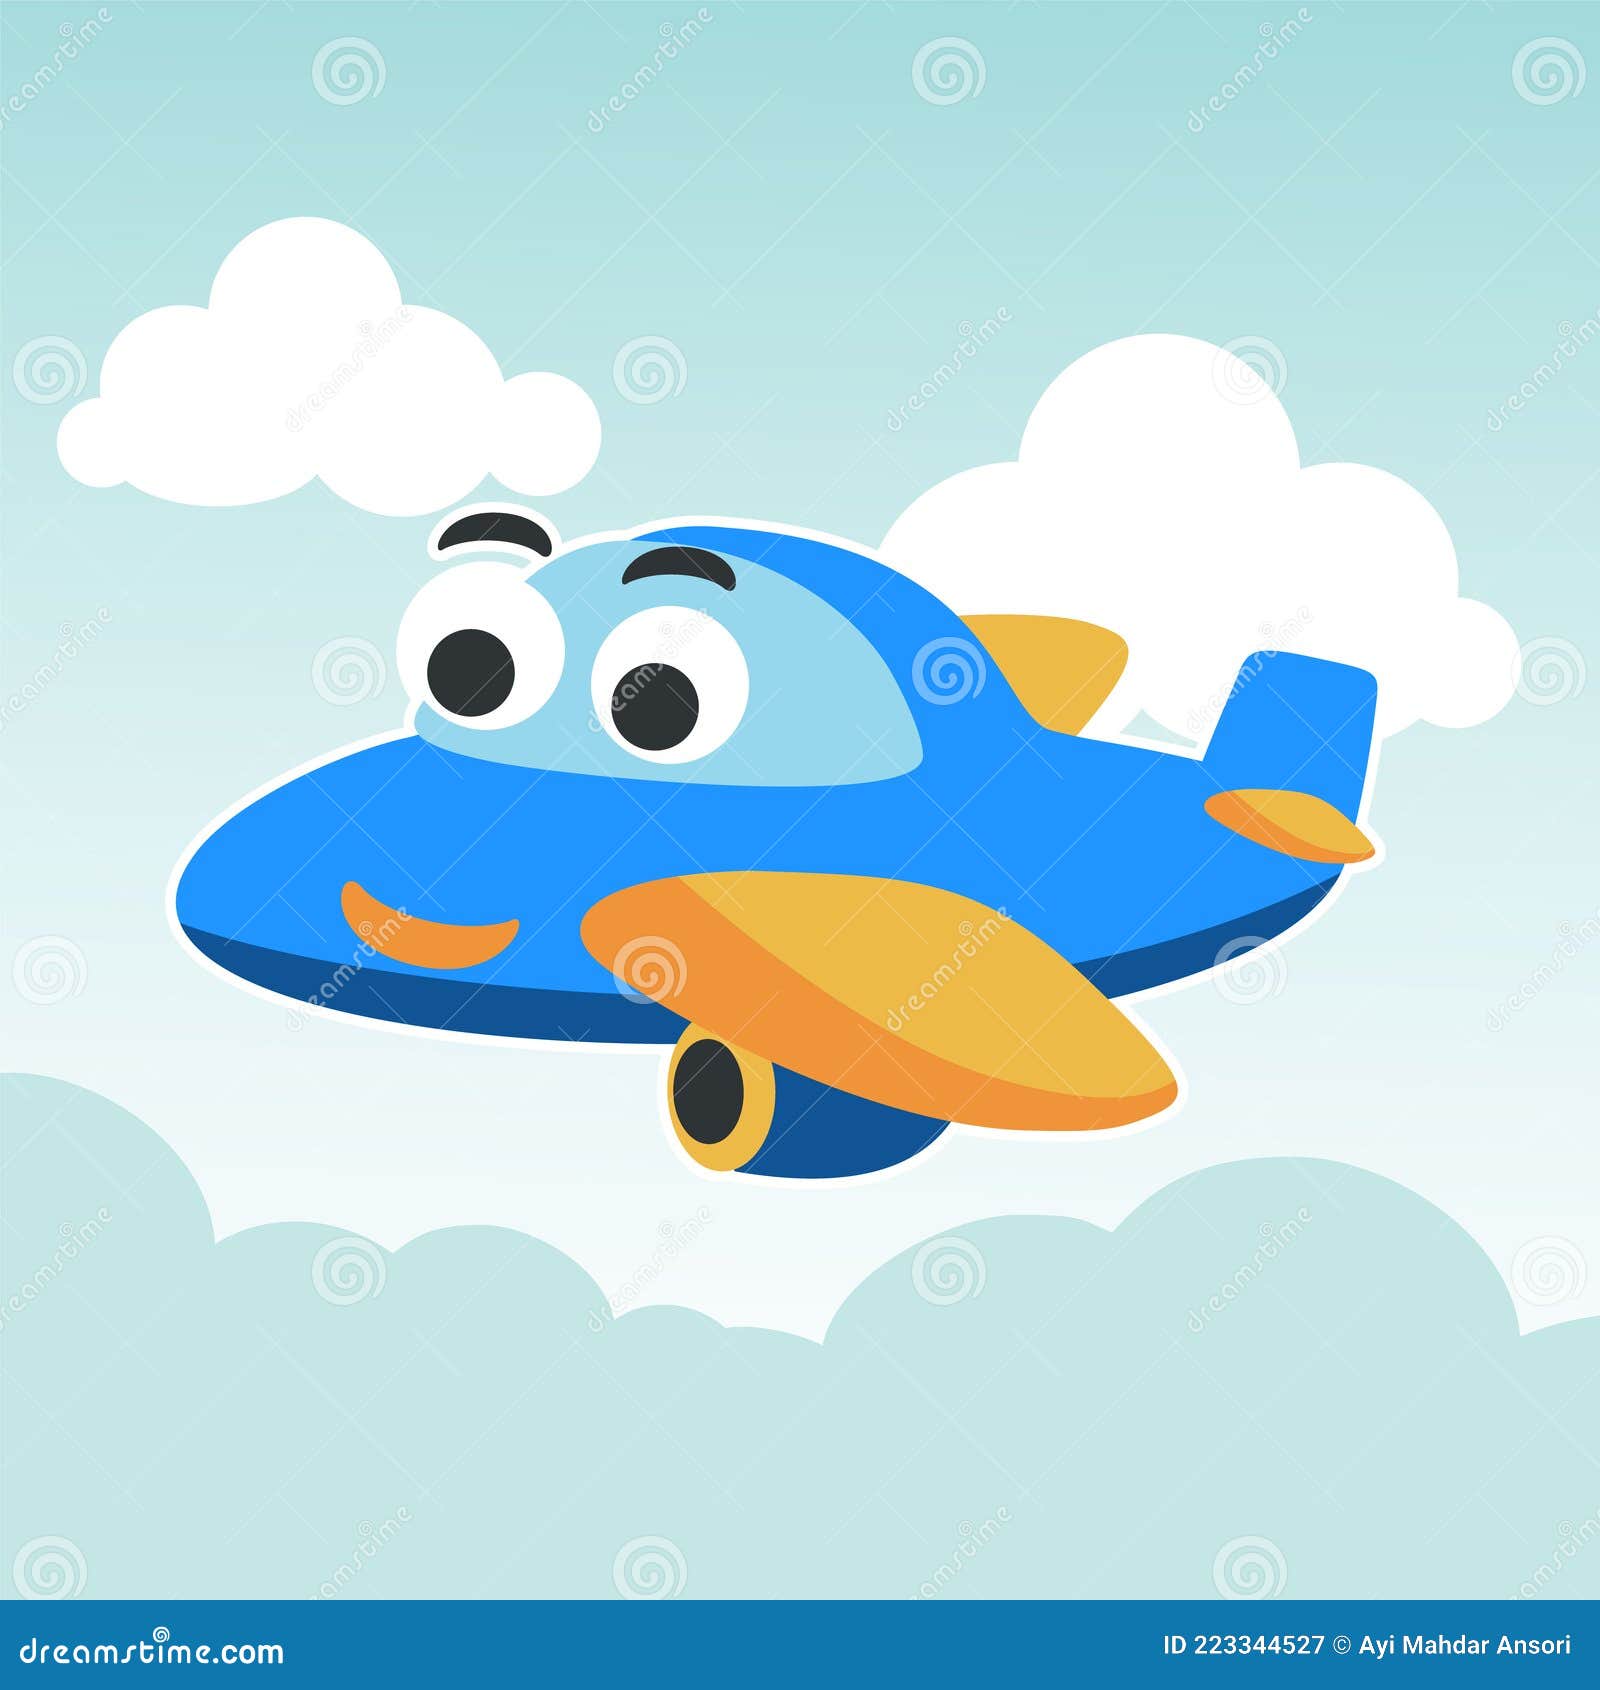 Funny Cute Airplane is Flying in the Air. Cartoon Hand Drawn Vector ...